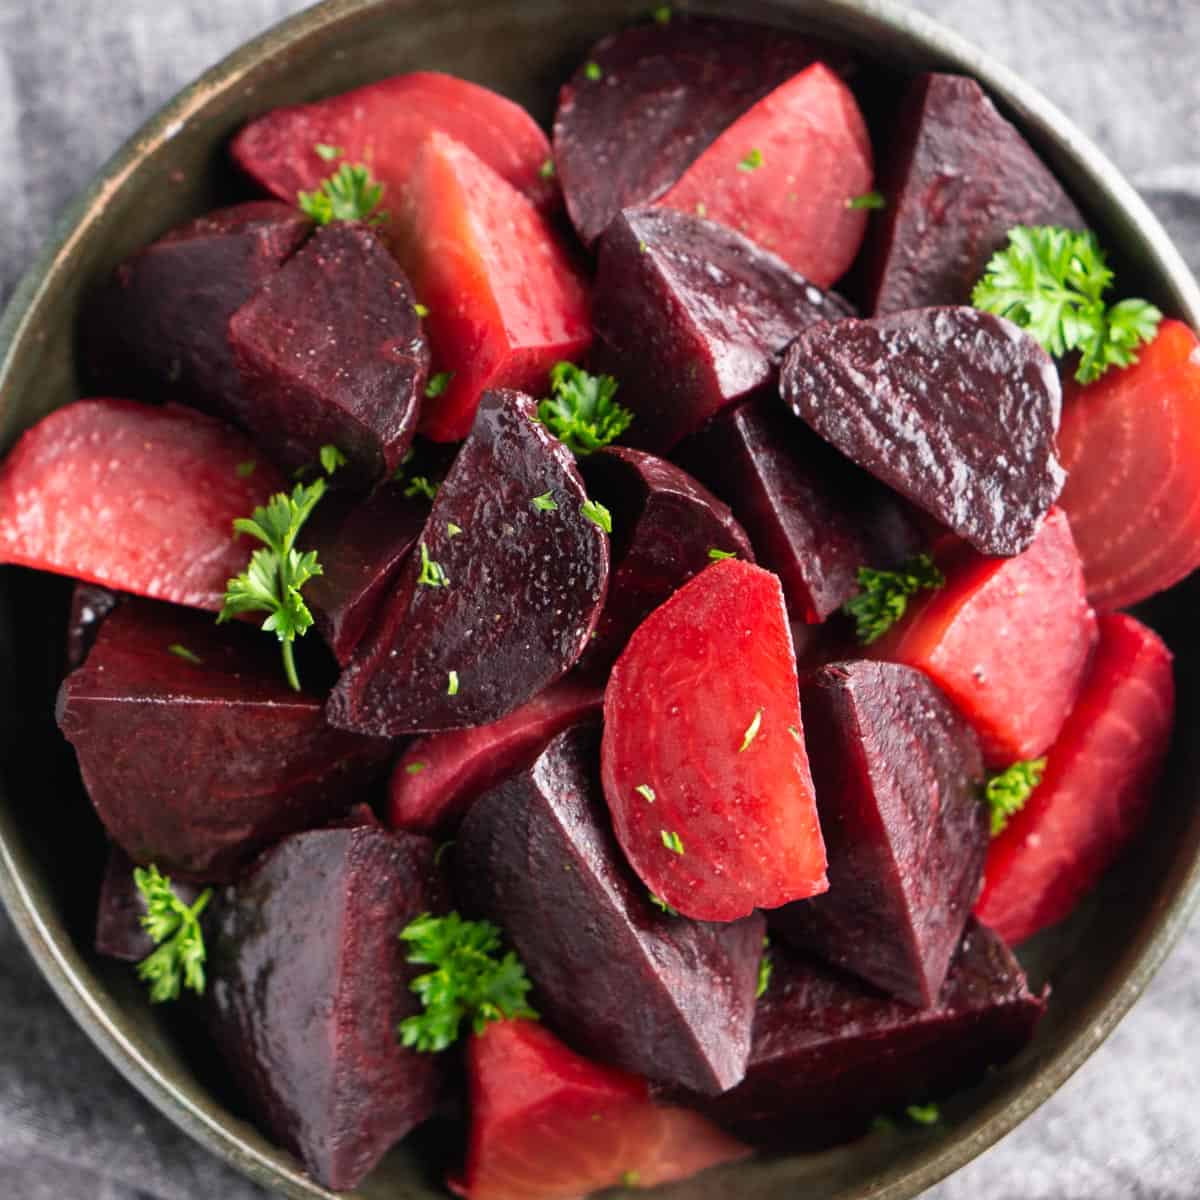 cooked beets with parsely garnish in ceramic bowl